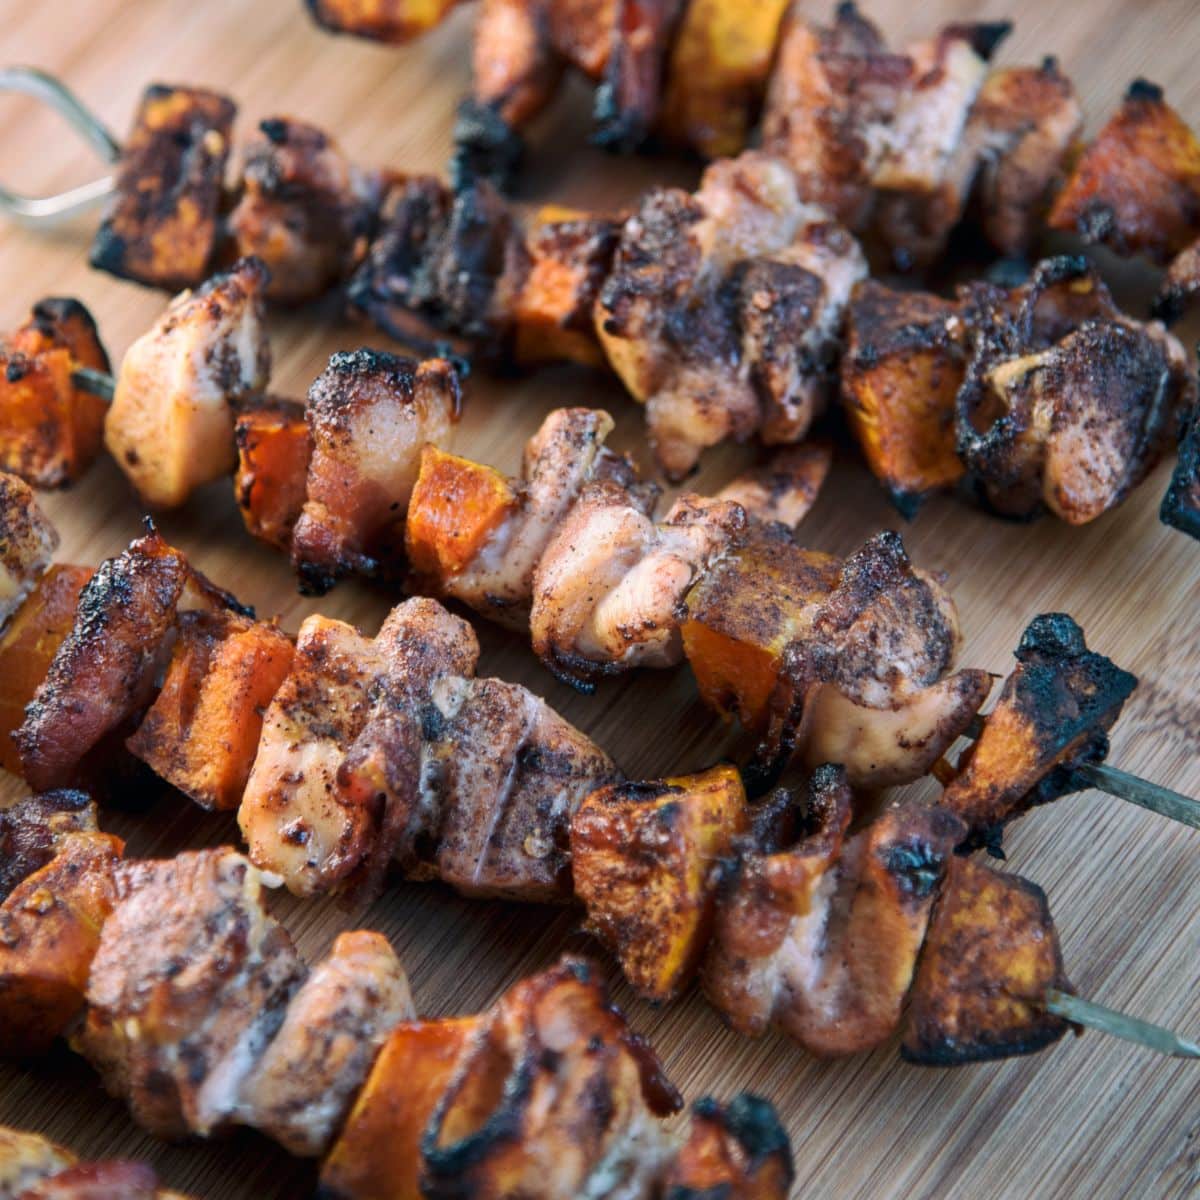 Chicken, Bacon, and Sweet Potato Skewers on a wooden board.